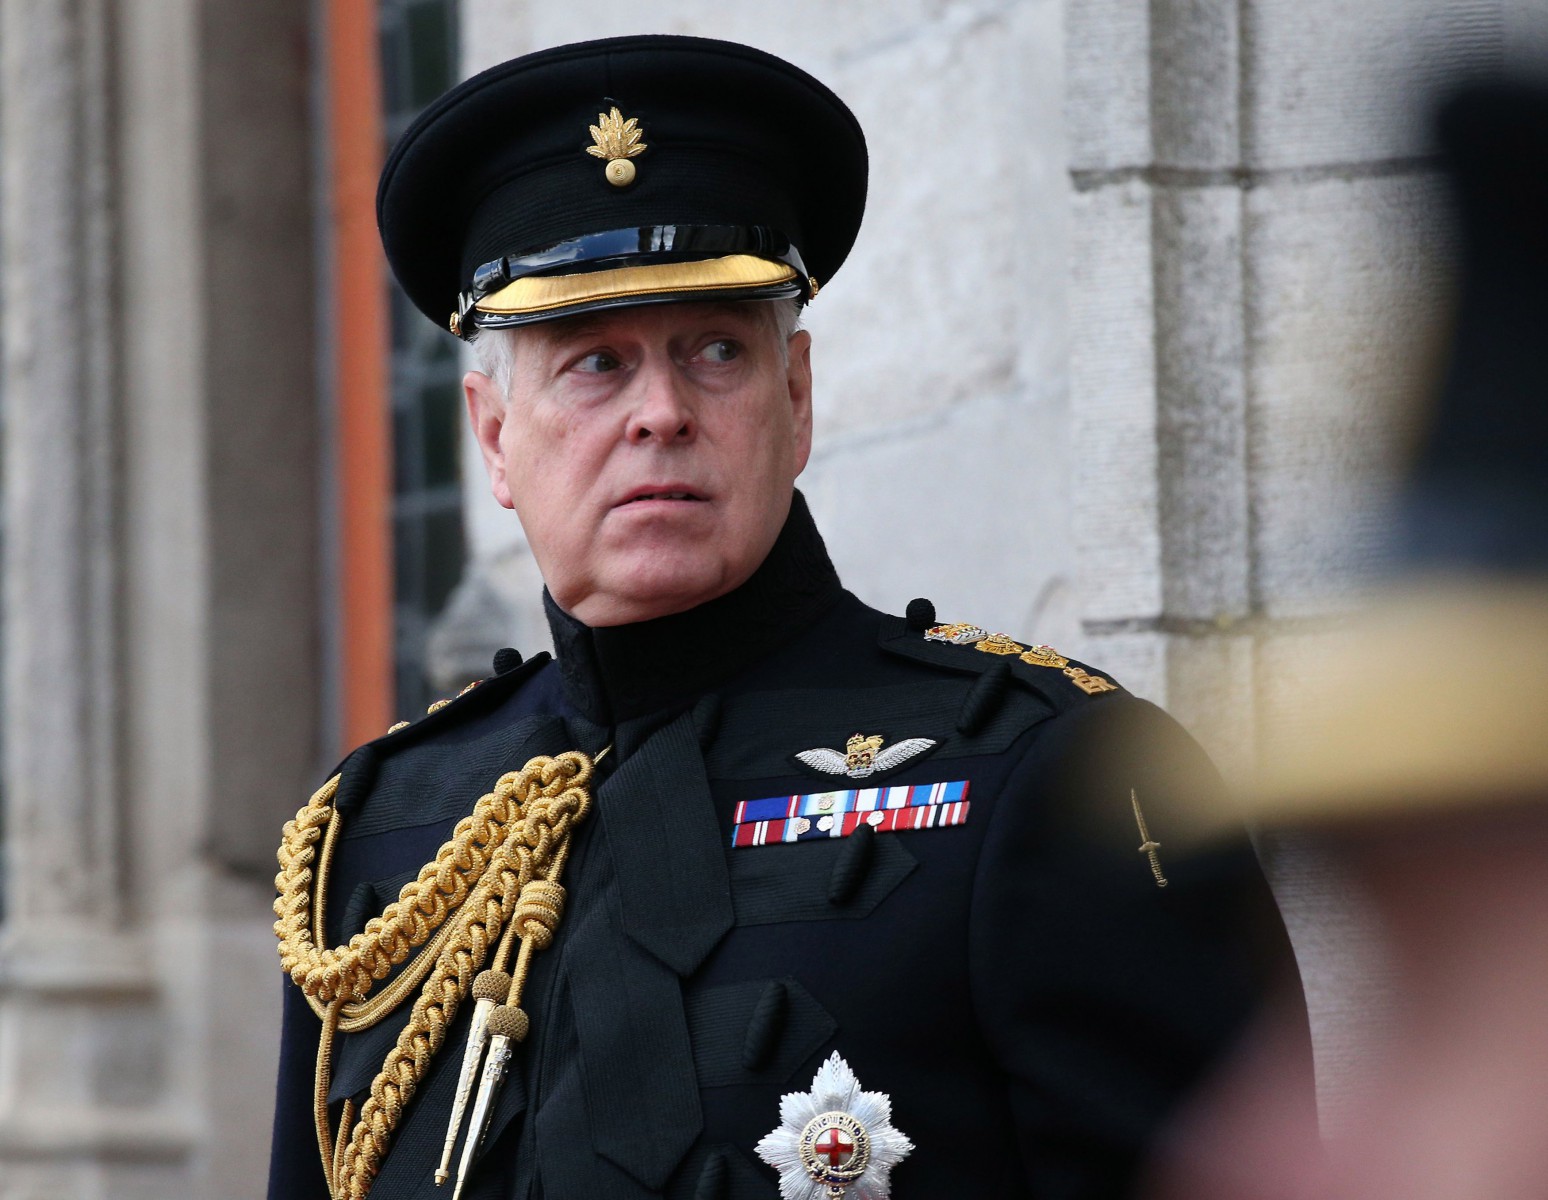 As a former serviceman, Prince Andrew would have almost certainly attended the reception